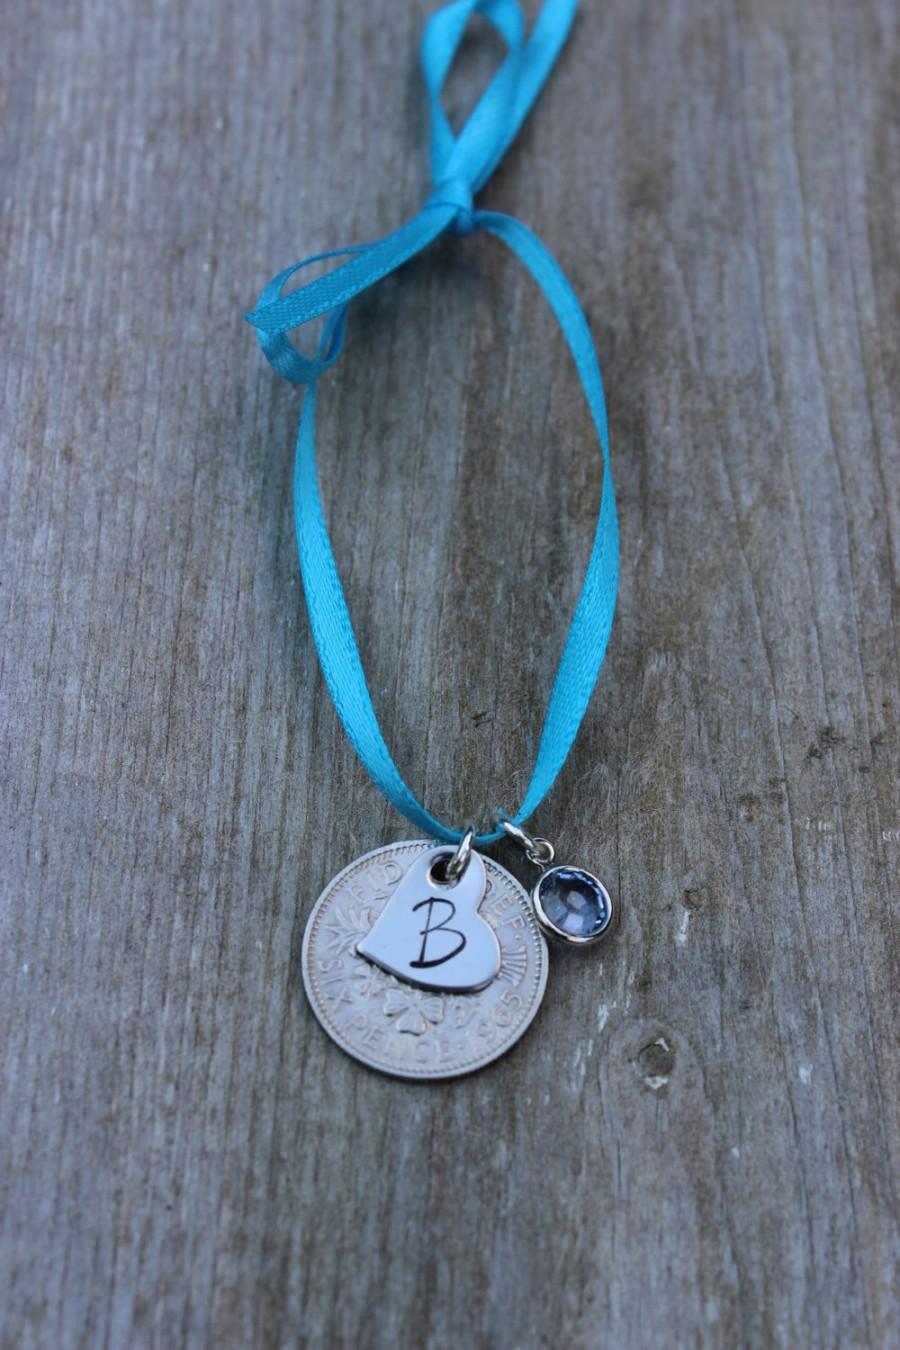 Wedding - Silver Sixpence for Bride - Sixpence in her Shoe - Sixpence Gift for Bride with Blue Swarovski Crystal and Stamped Heart Charm